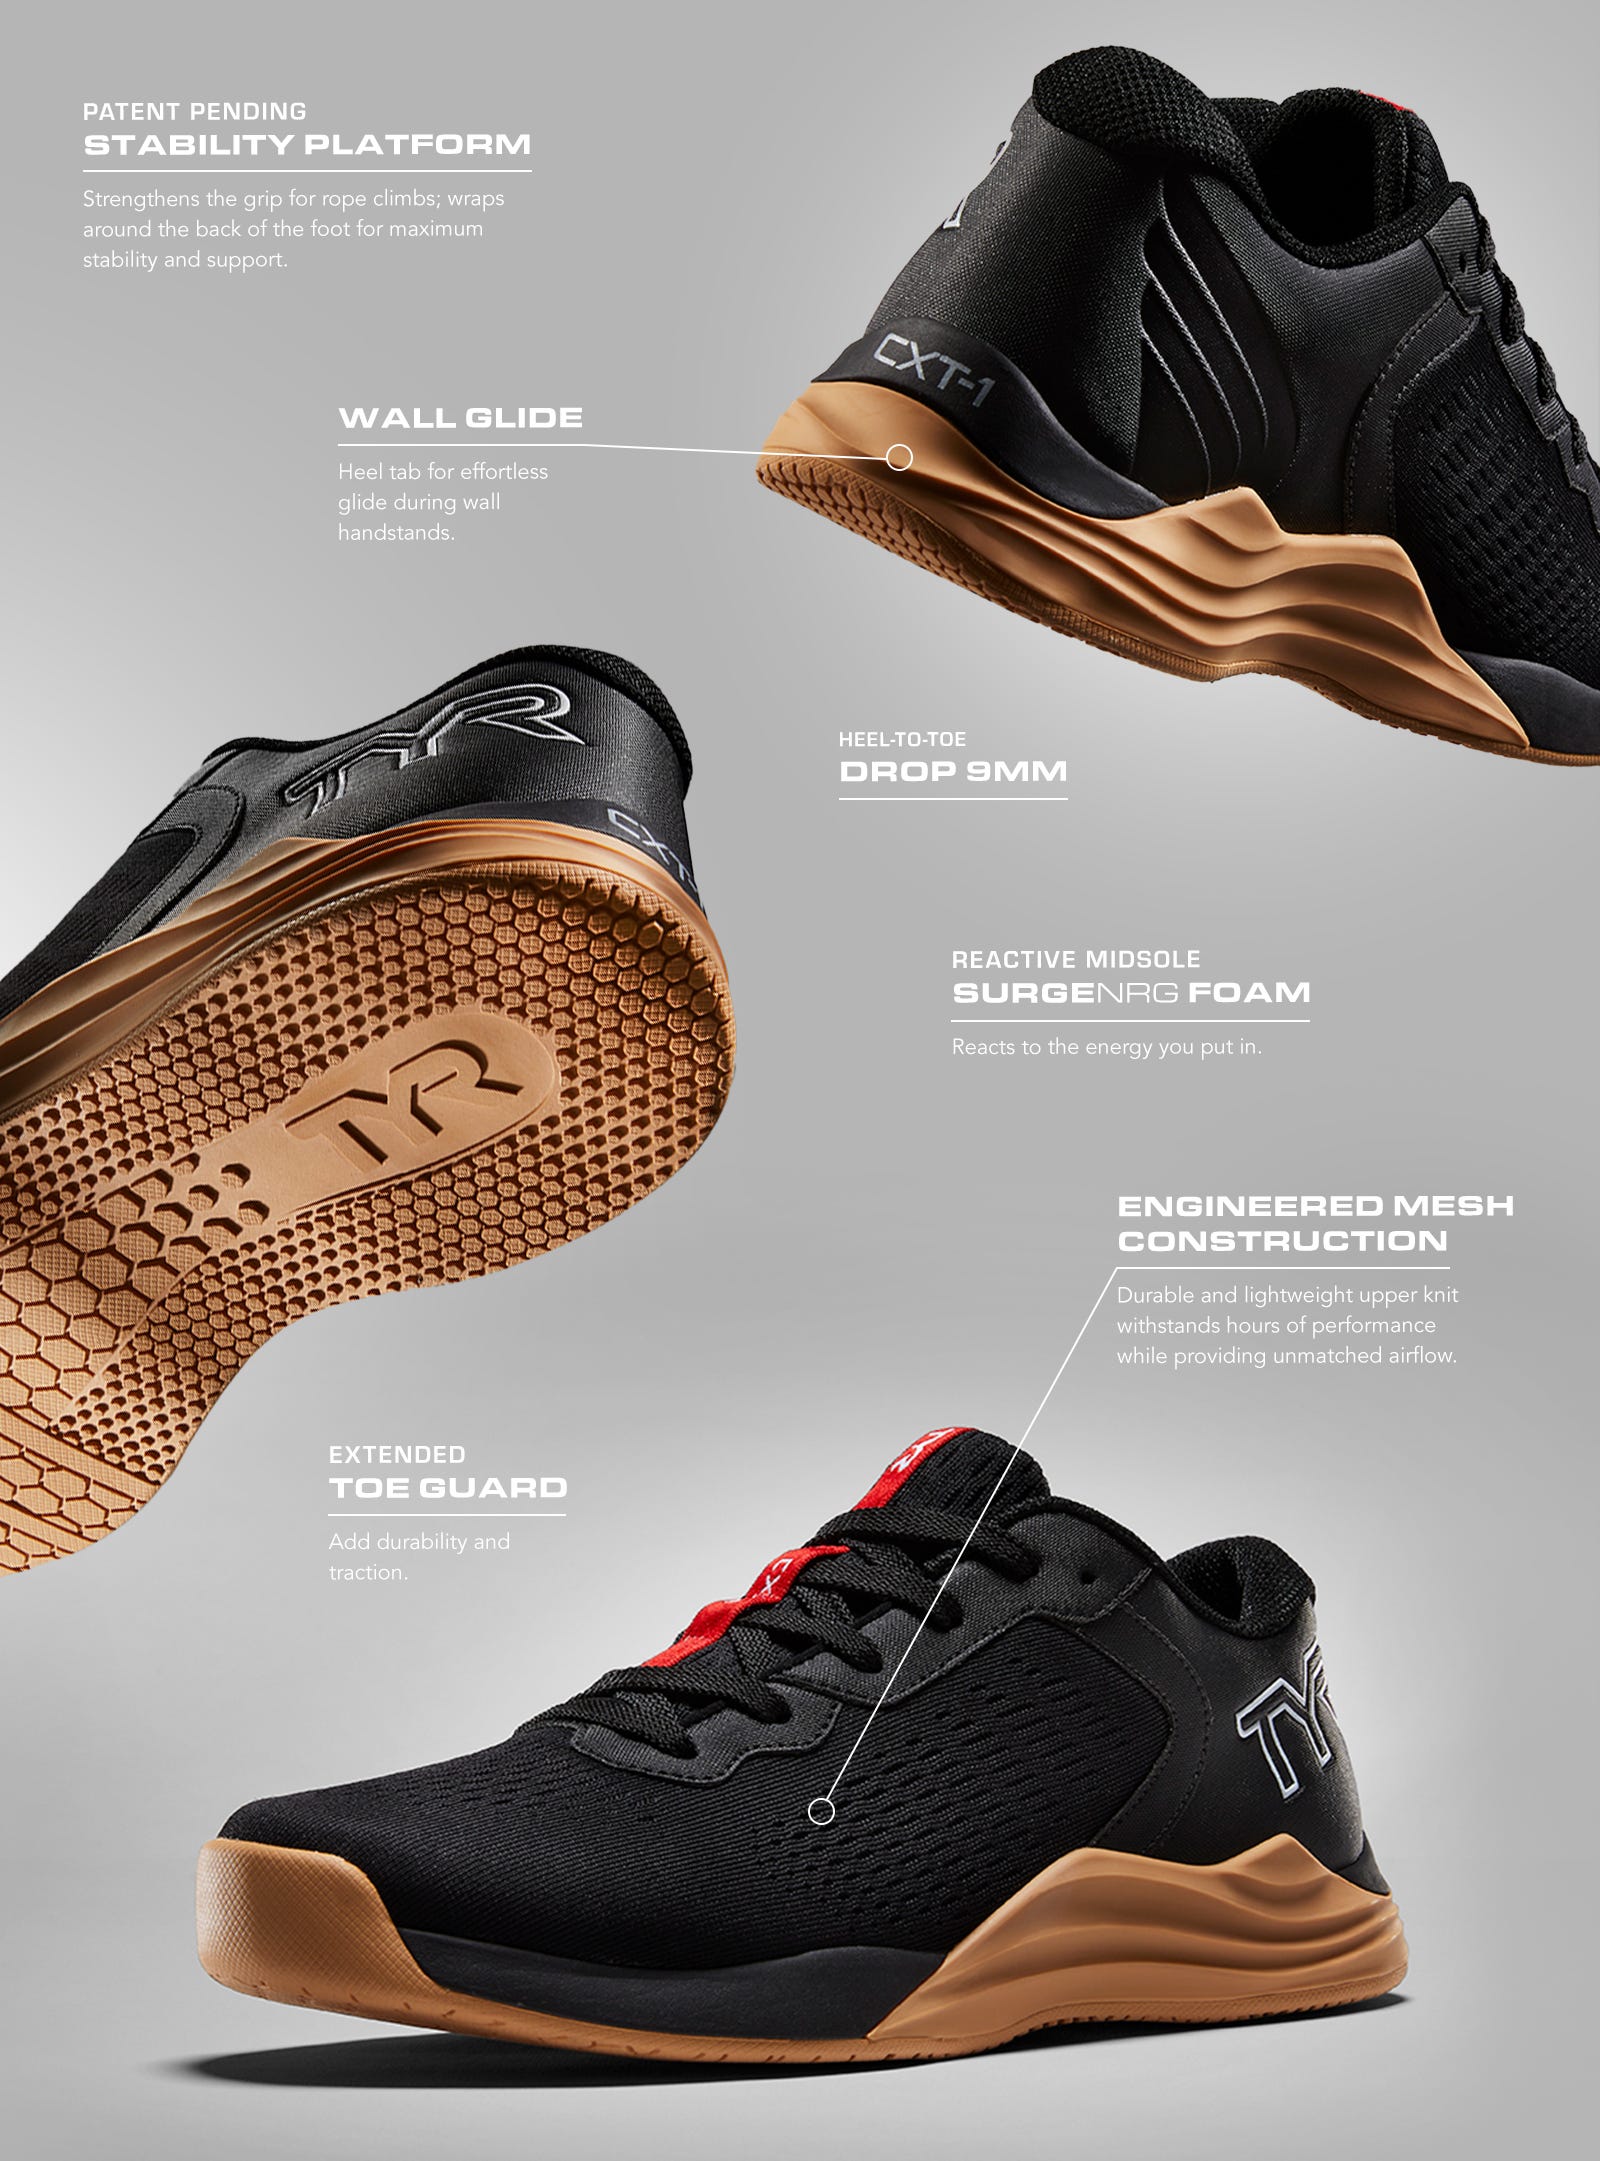 Patent Pending - Stability Platform, Wall Glide, Heel to toe drop 9mm, reactive midsole surgenrg foam, extended toe guard, engineered mesh construction